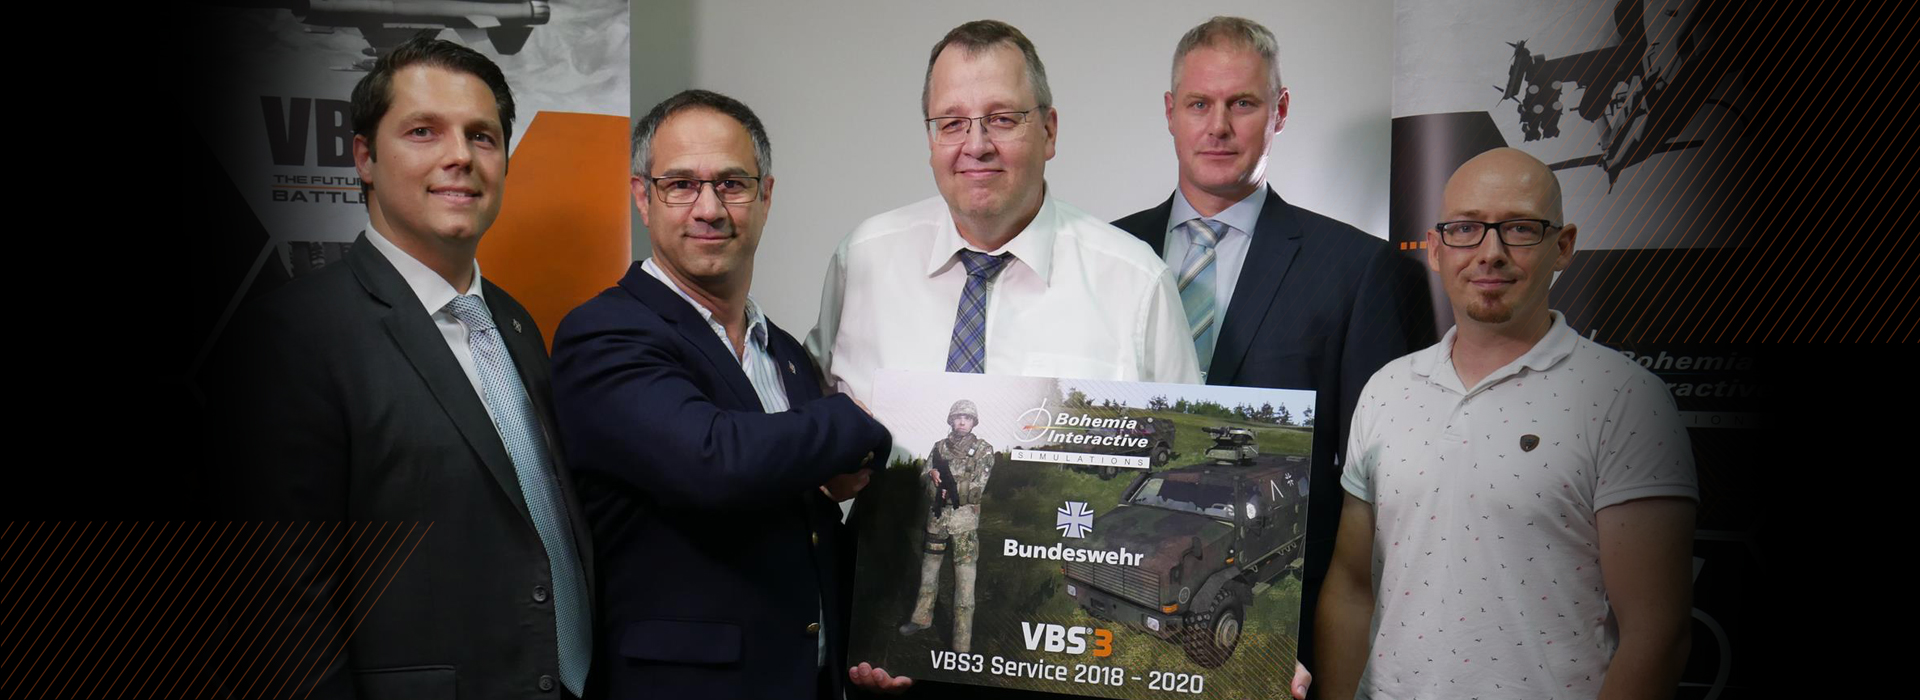 bisim_to_provide_localized_support_services_to_bundeswehr_